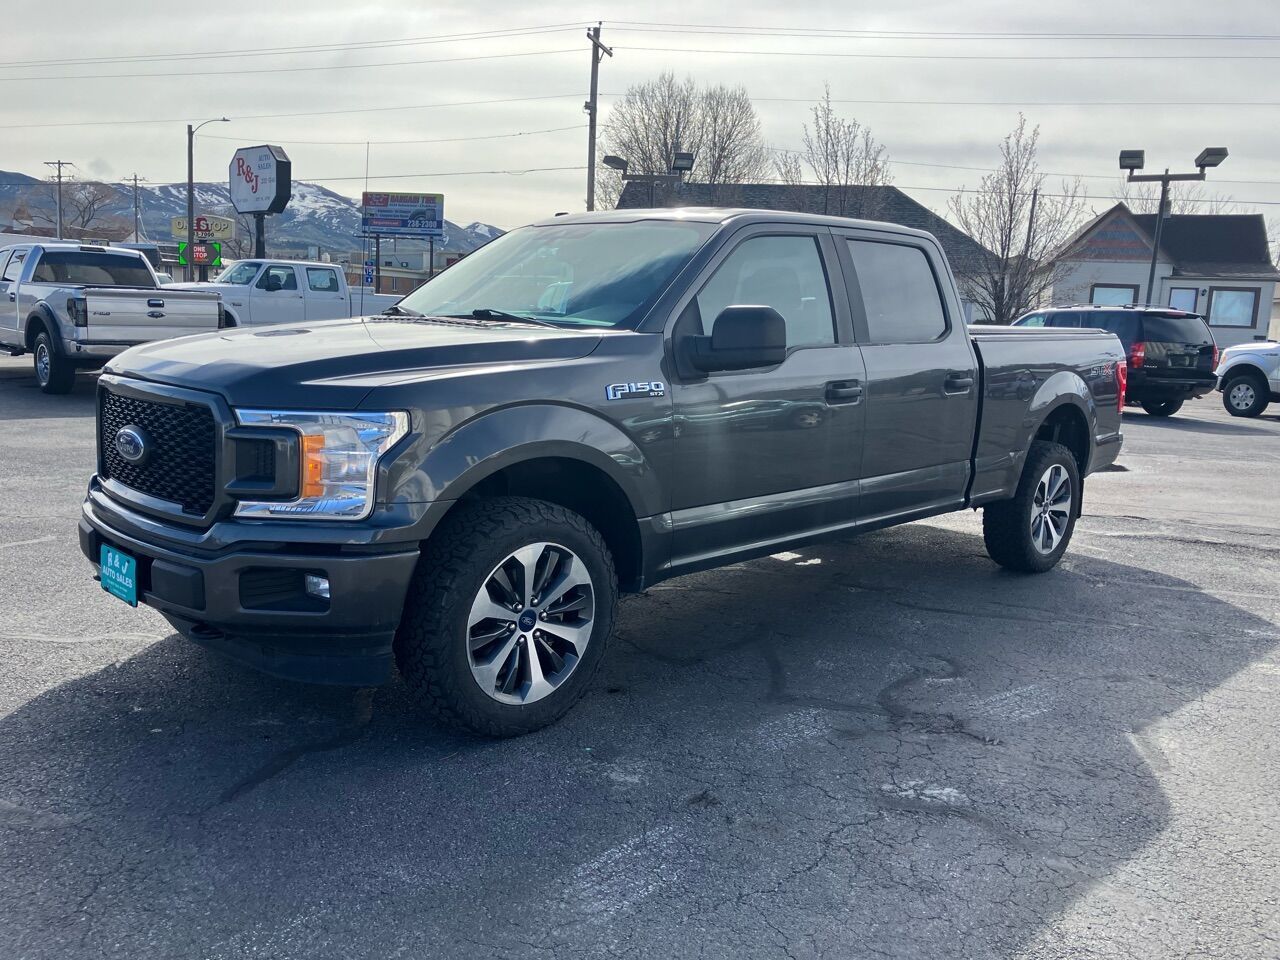 2019 - Ford - F-150 - $22,995